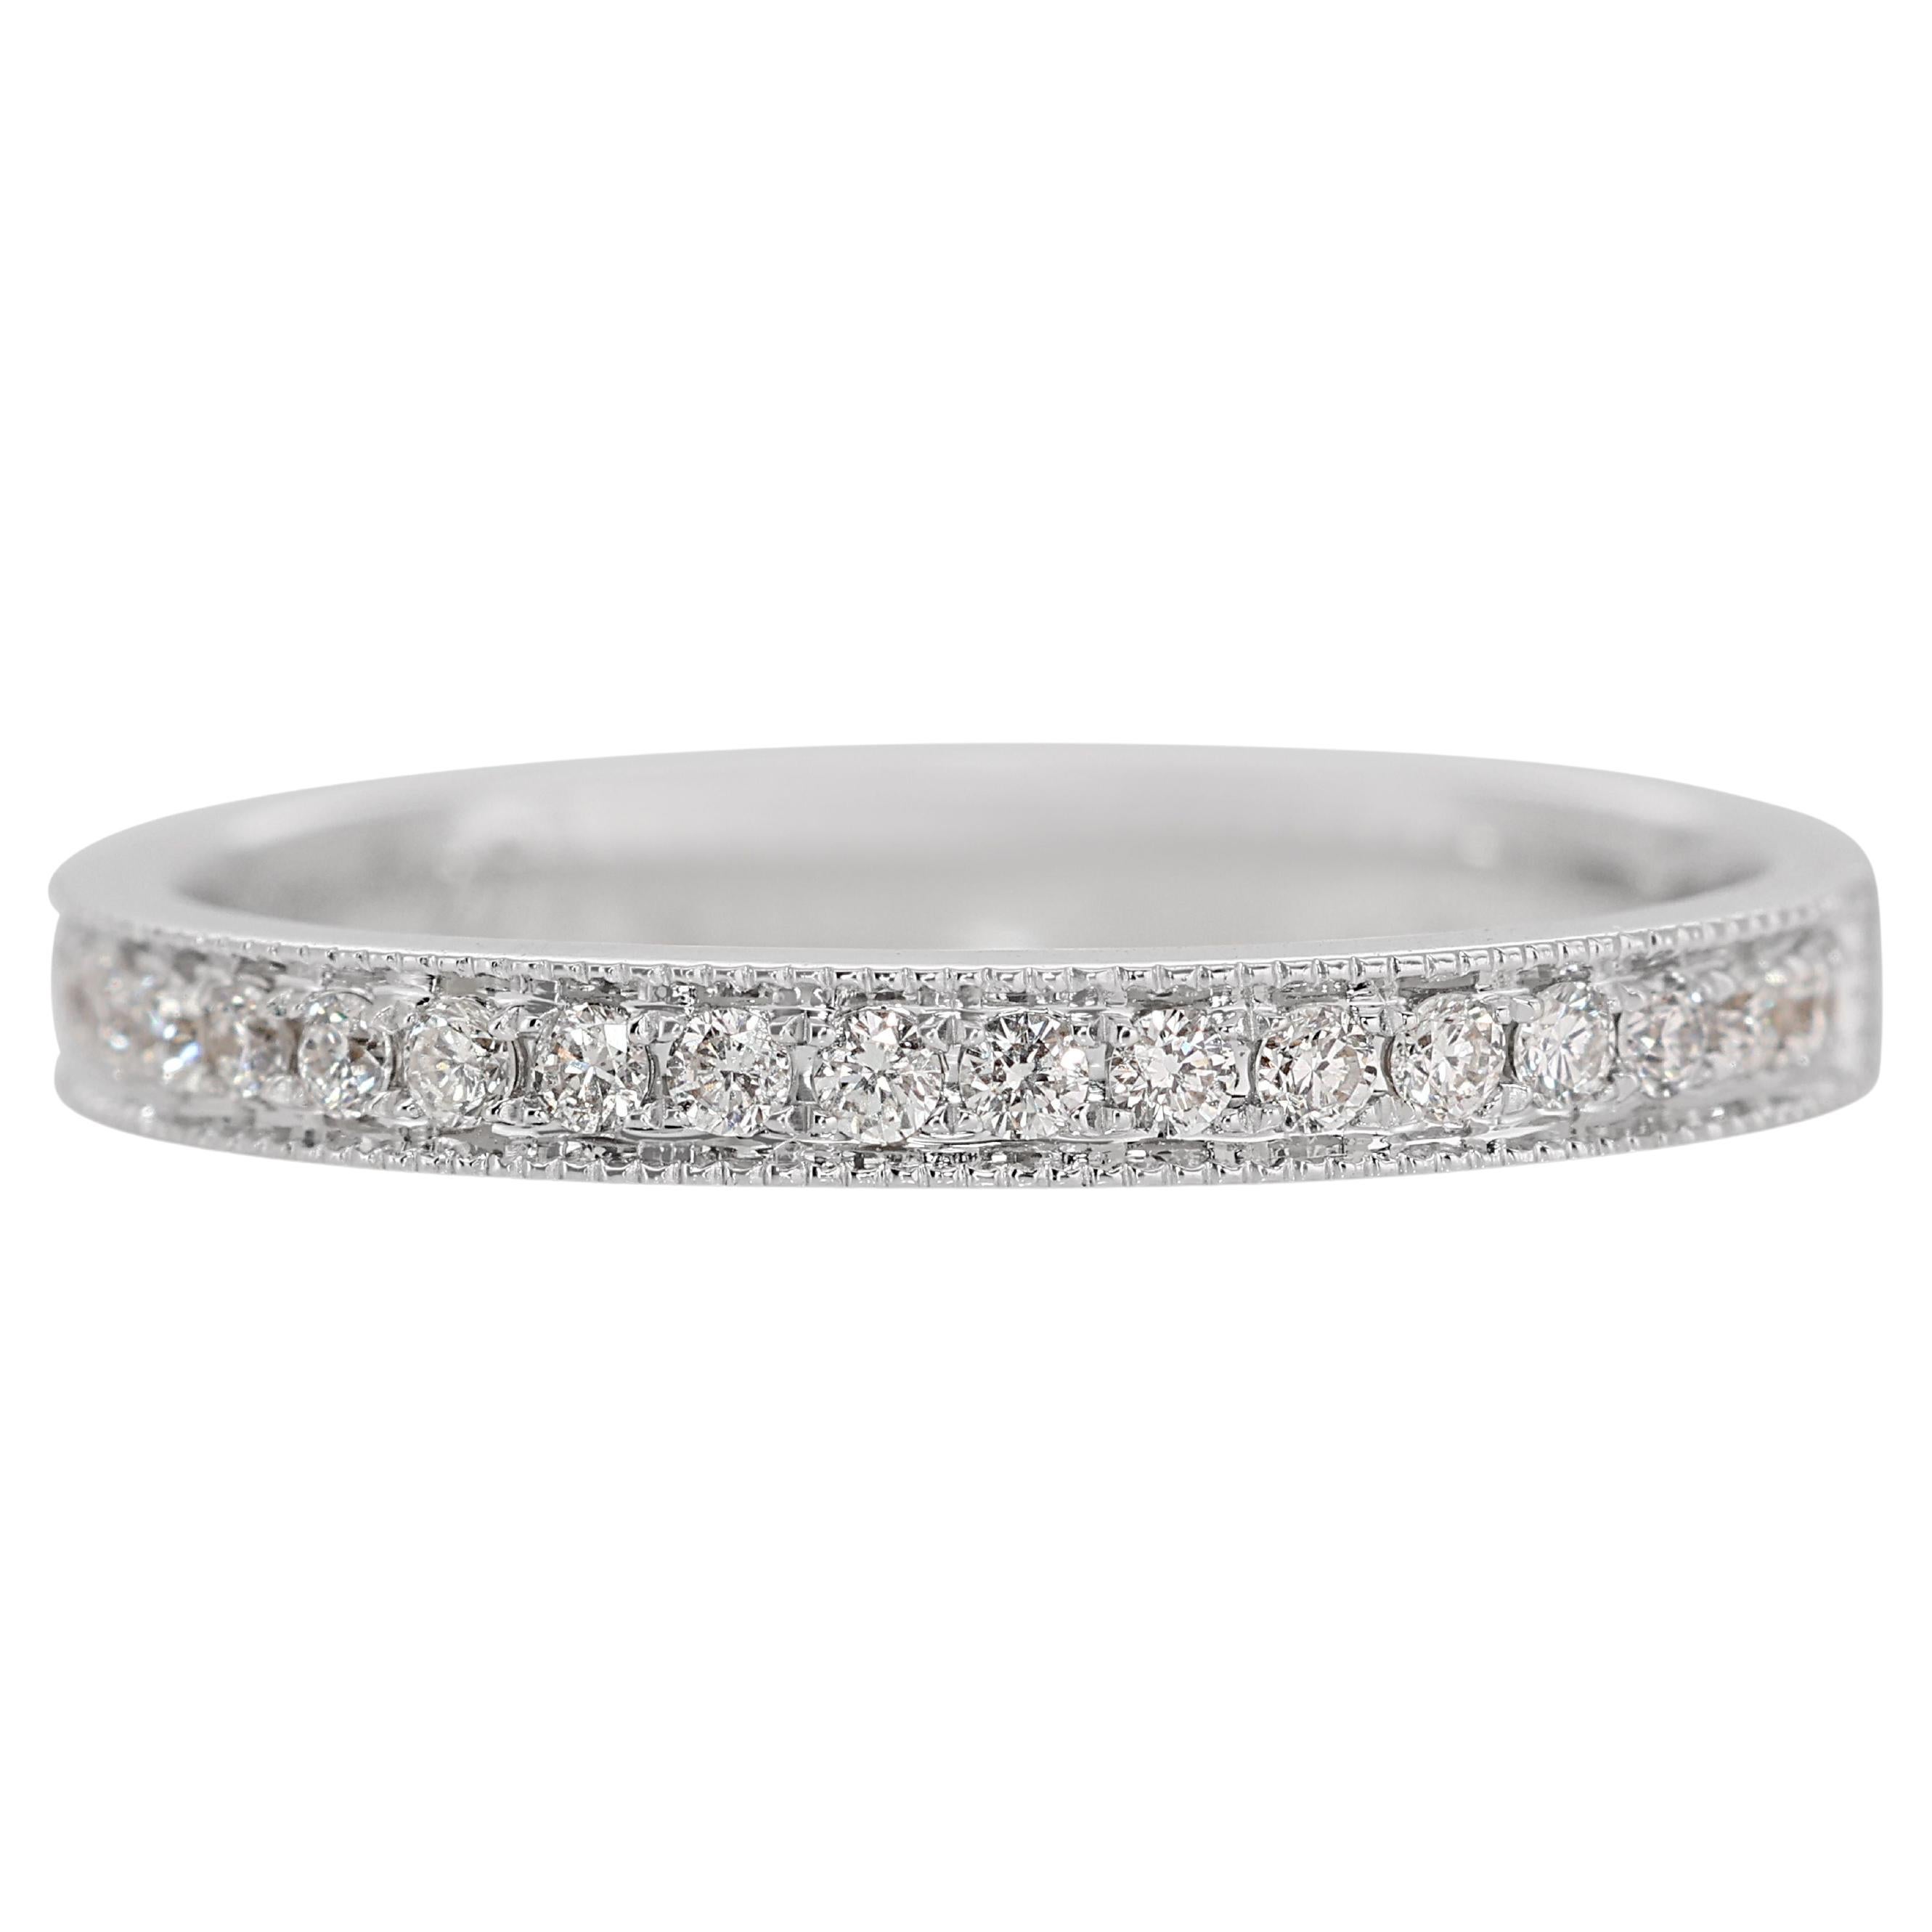 Dazzling 18k White Gold Pave Thin Band Ring with 0.18ct Natural Diamonds